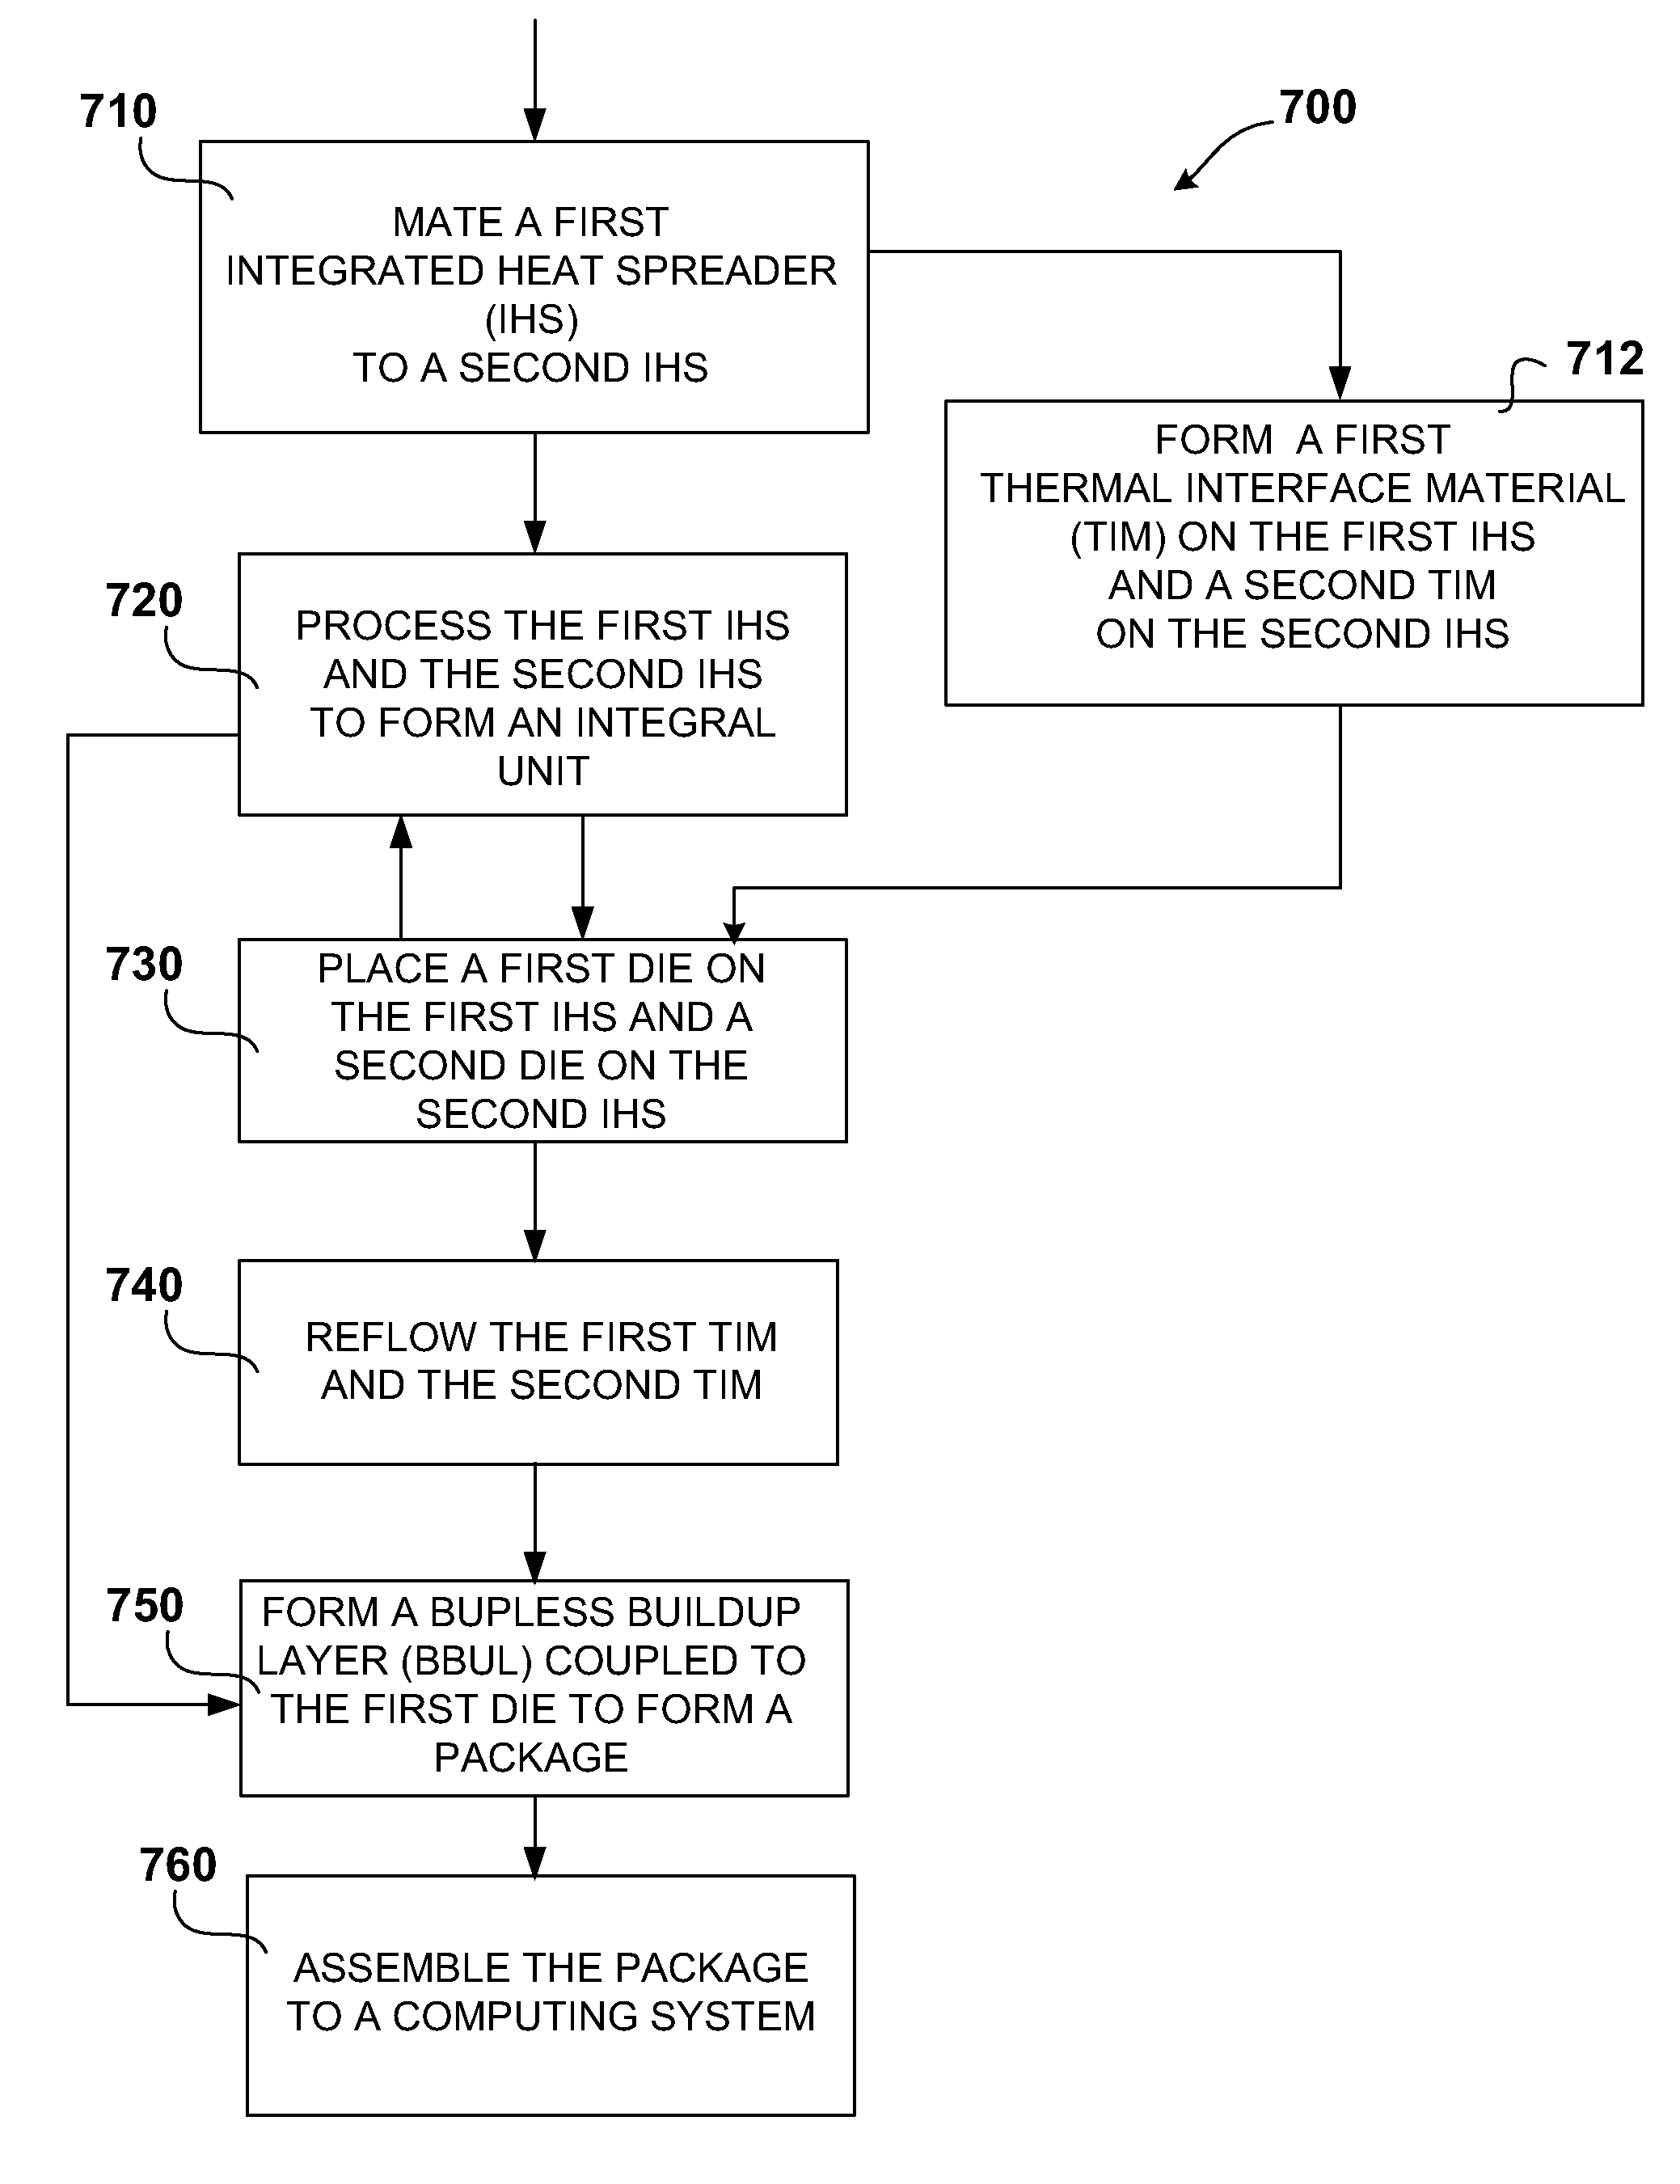 Dual-chip integrated heat spreader assembly, packages containing same, and systems containing same